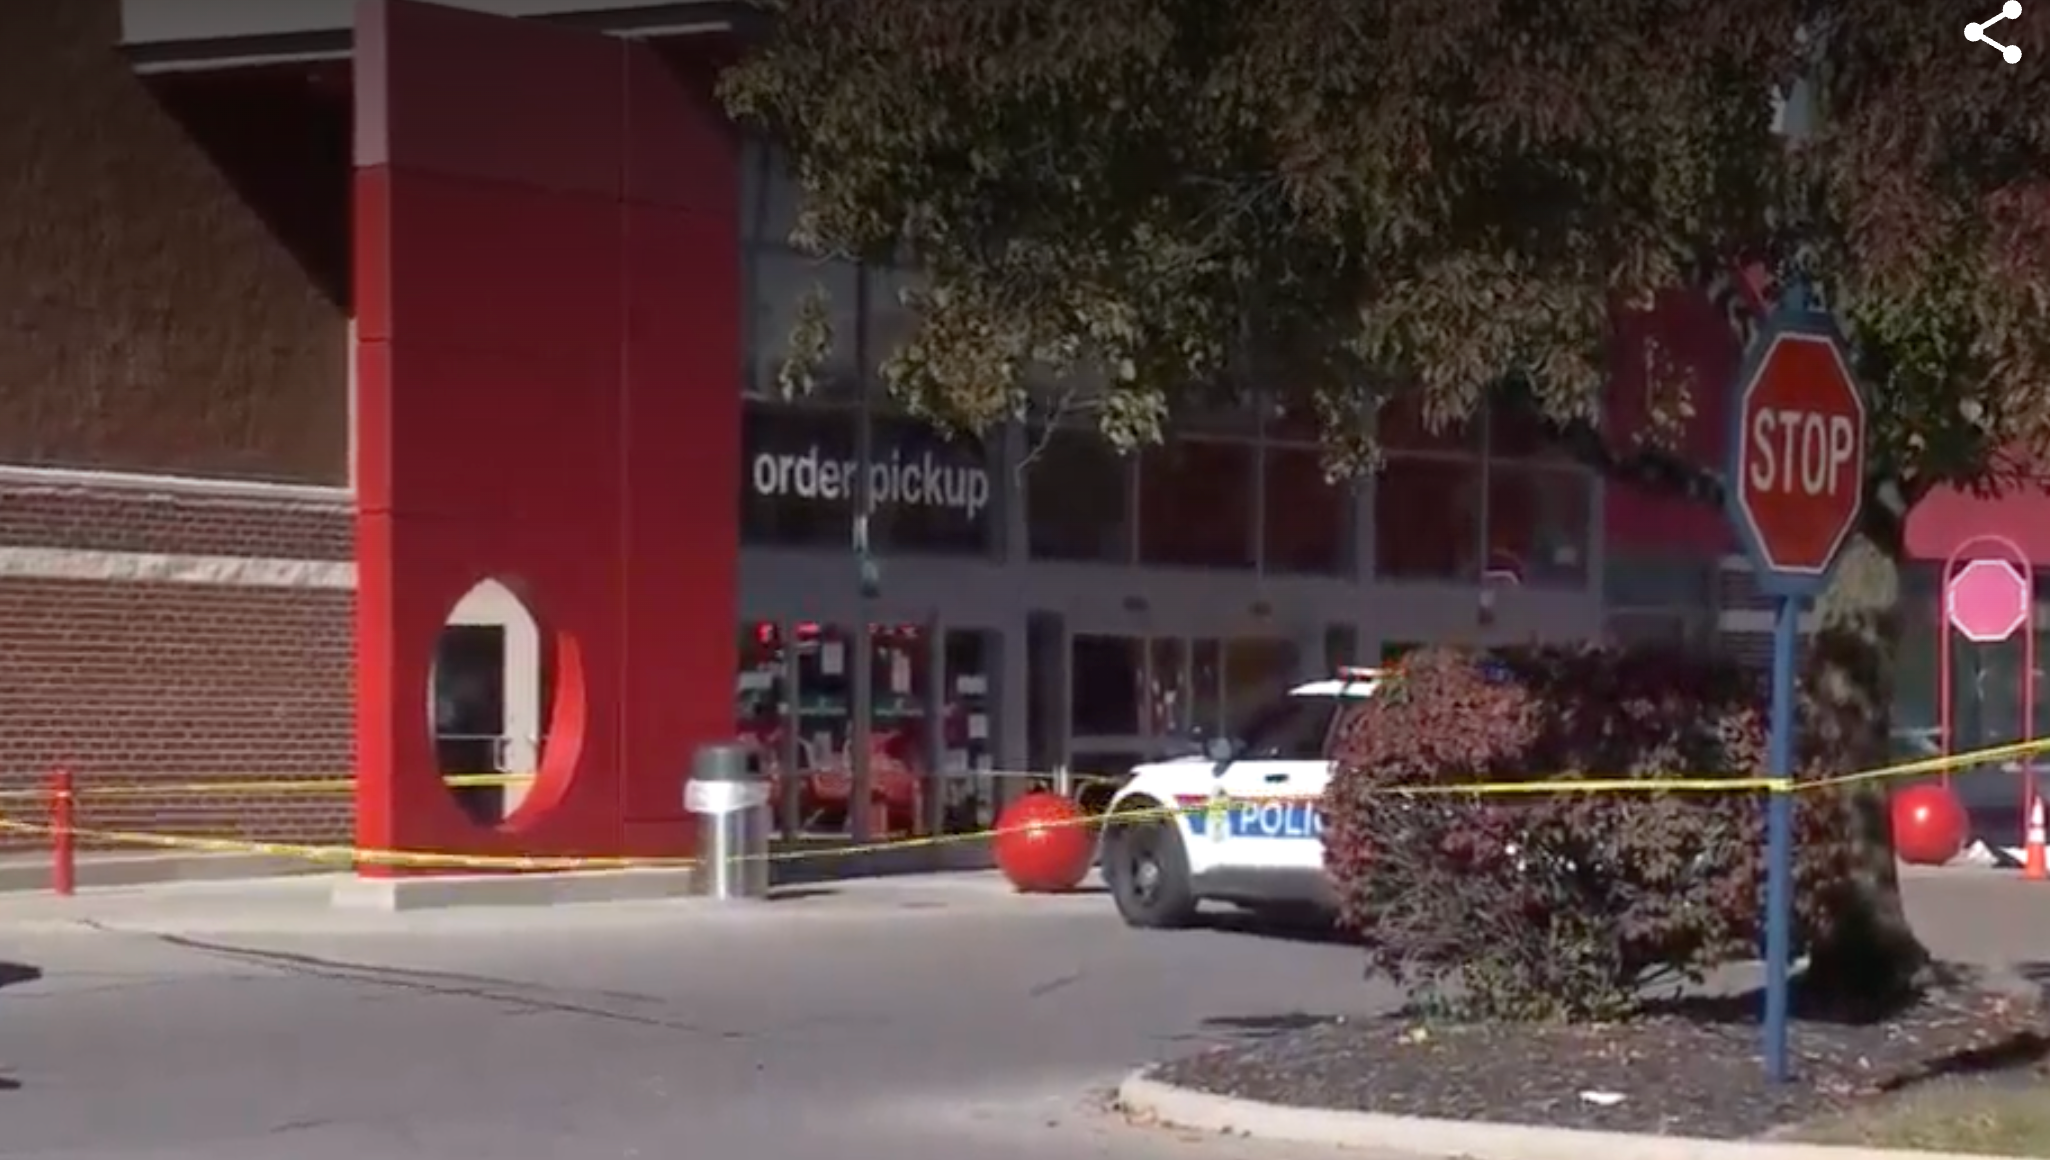 One person is dead after a shooting Monday morning outside of a Target store in northeast Columbus, Ohio, according to police.